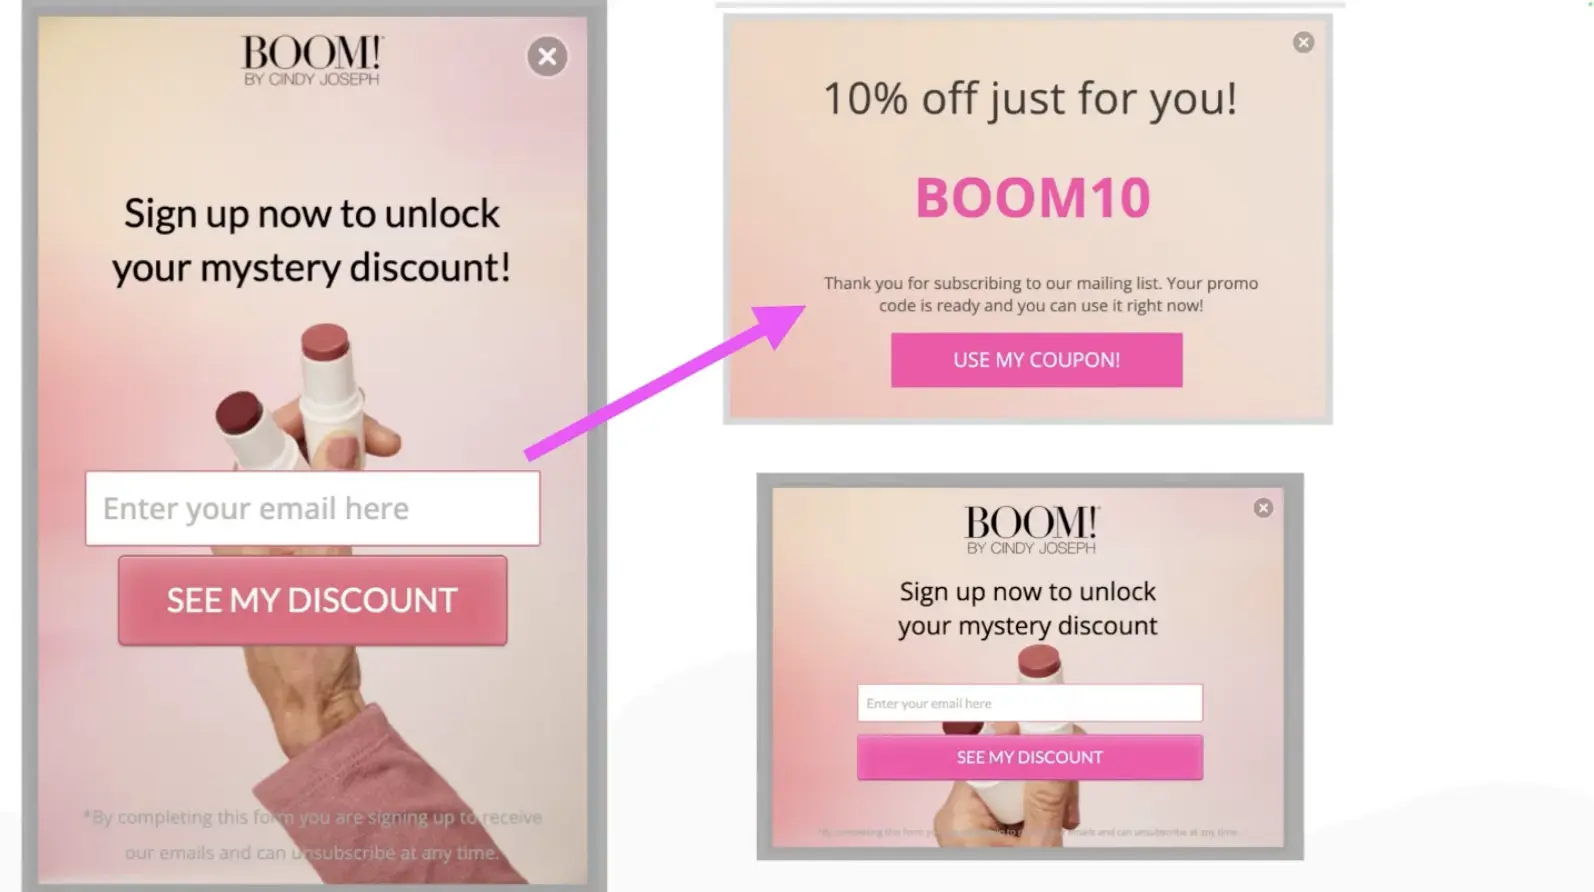 The image shows a multi-step Klaviyo form that Ezra Firestone uses on the website Boom! By Cindy Joseph. It asks for an email to see a discount, and then shows the consumer their discount -- a 10% off coupon. 